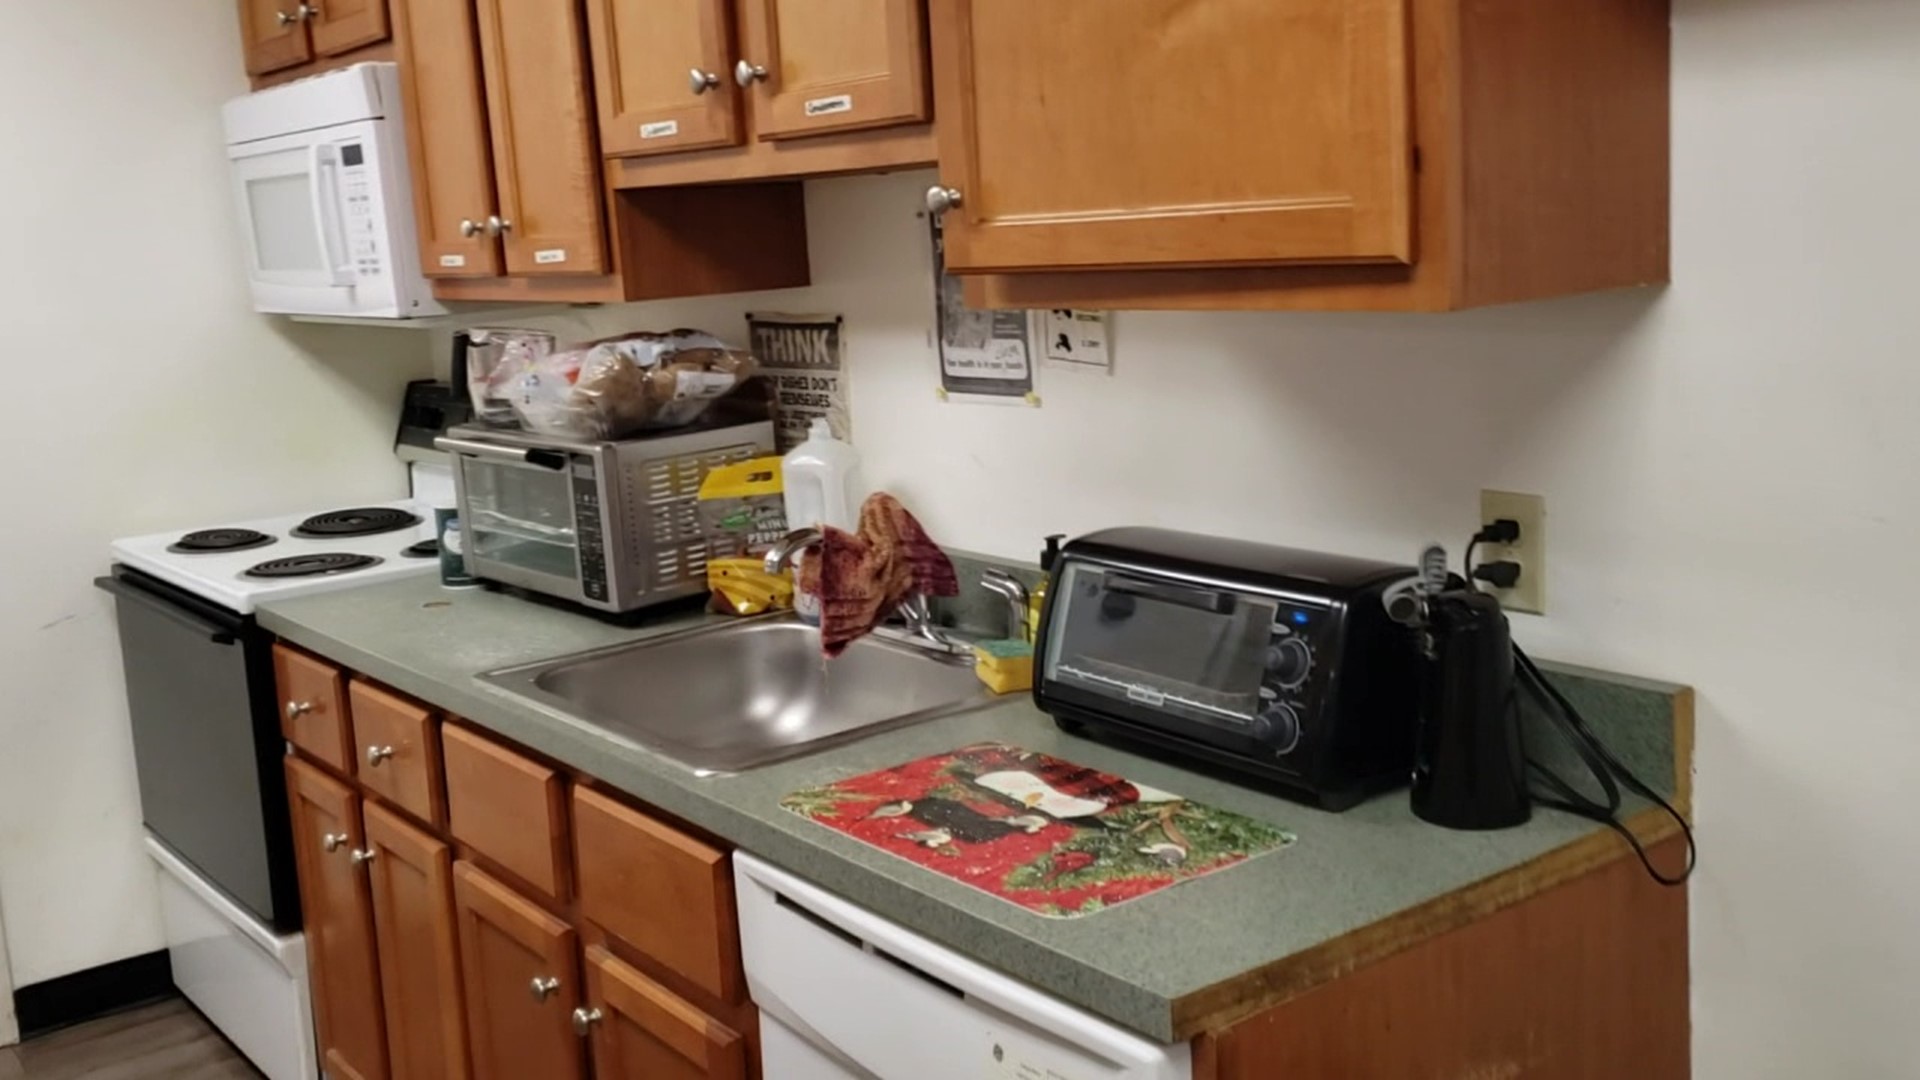 They're calling it "kitchen impossible." A nonprofit in Luzerne County is raising money for a new kitchen at a homeless shelter.